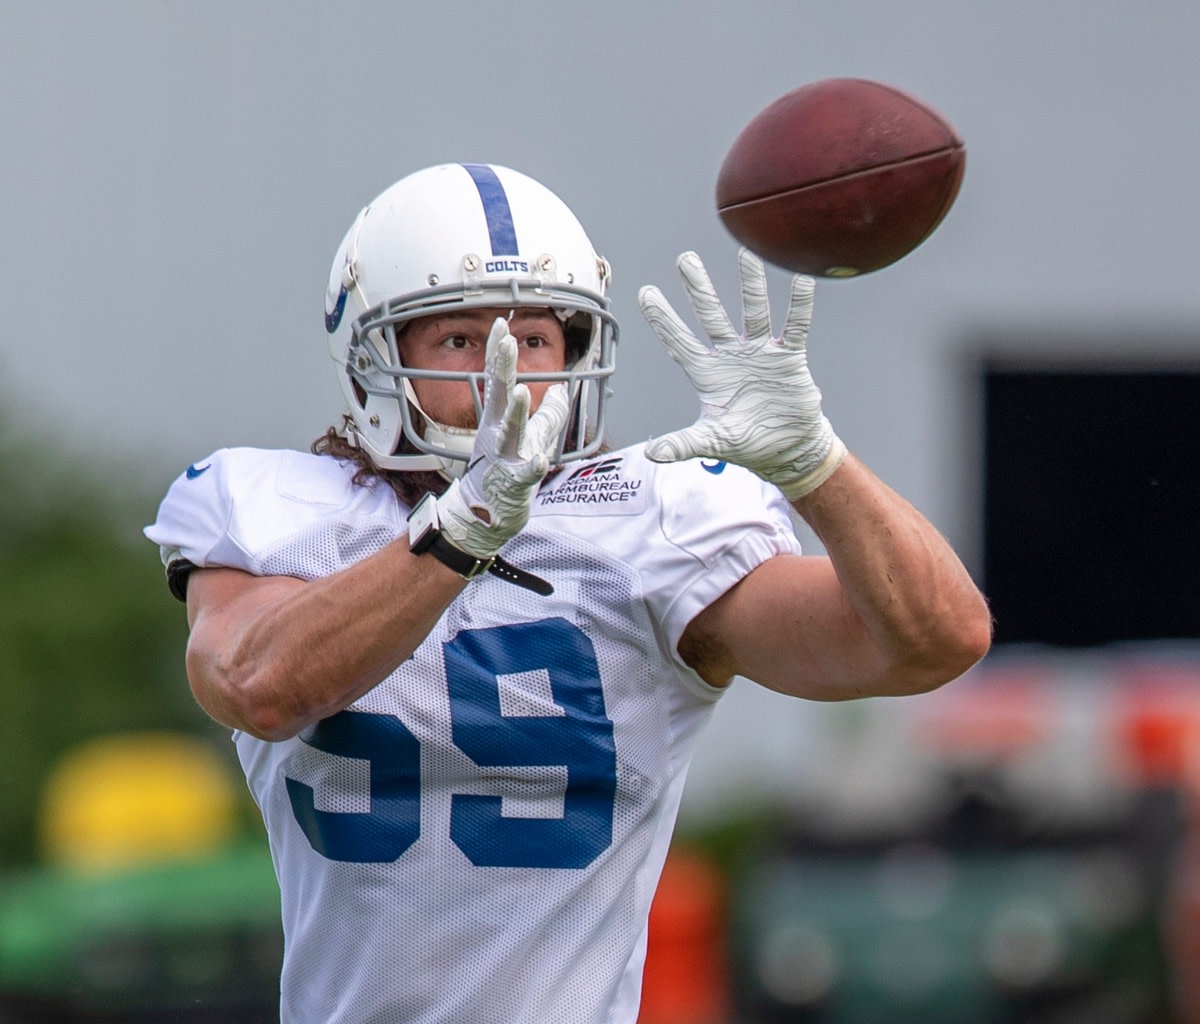 Rookie linebacker Jordan Glasgow was drafted in the sixth round to be a special-teams standout for the Indianapolis Colts.